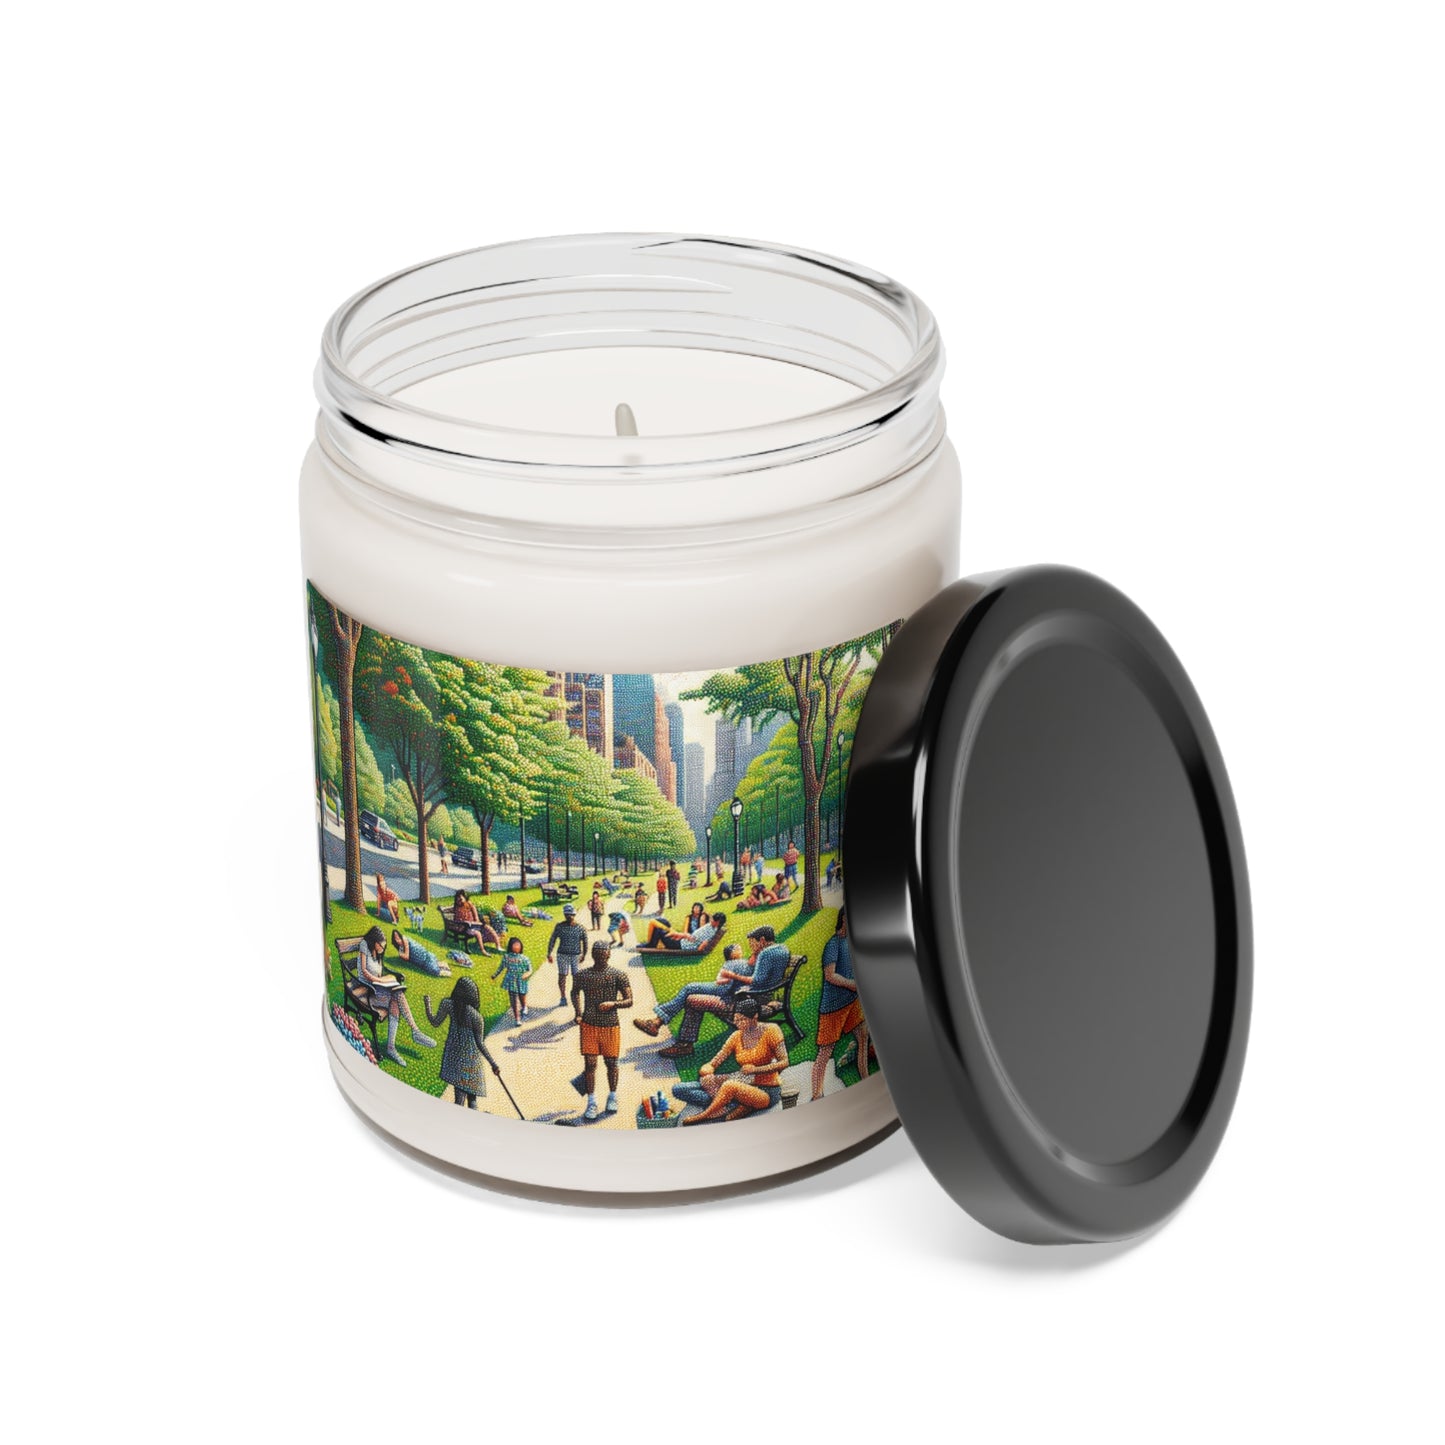 "Dotty Cityscape" - The Alien Scented Soy Candle 9oz Pointillism Style